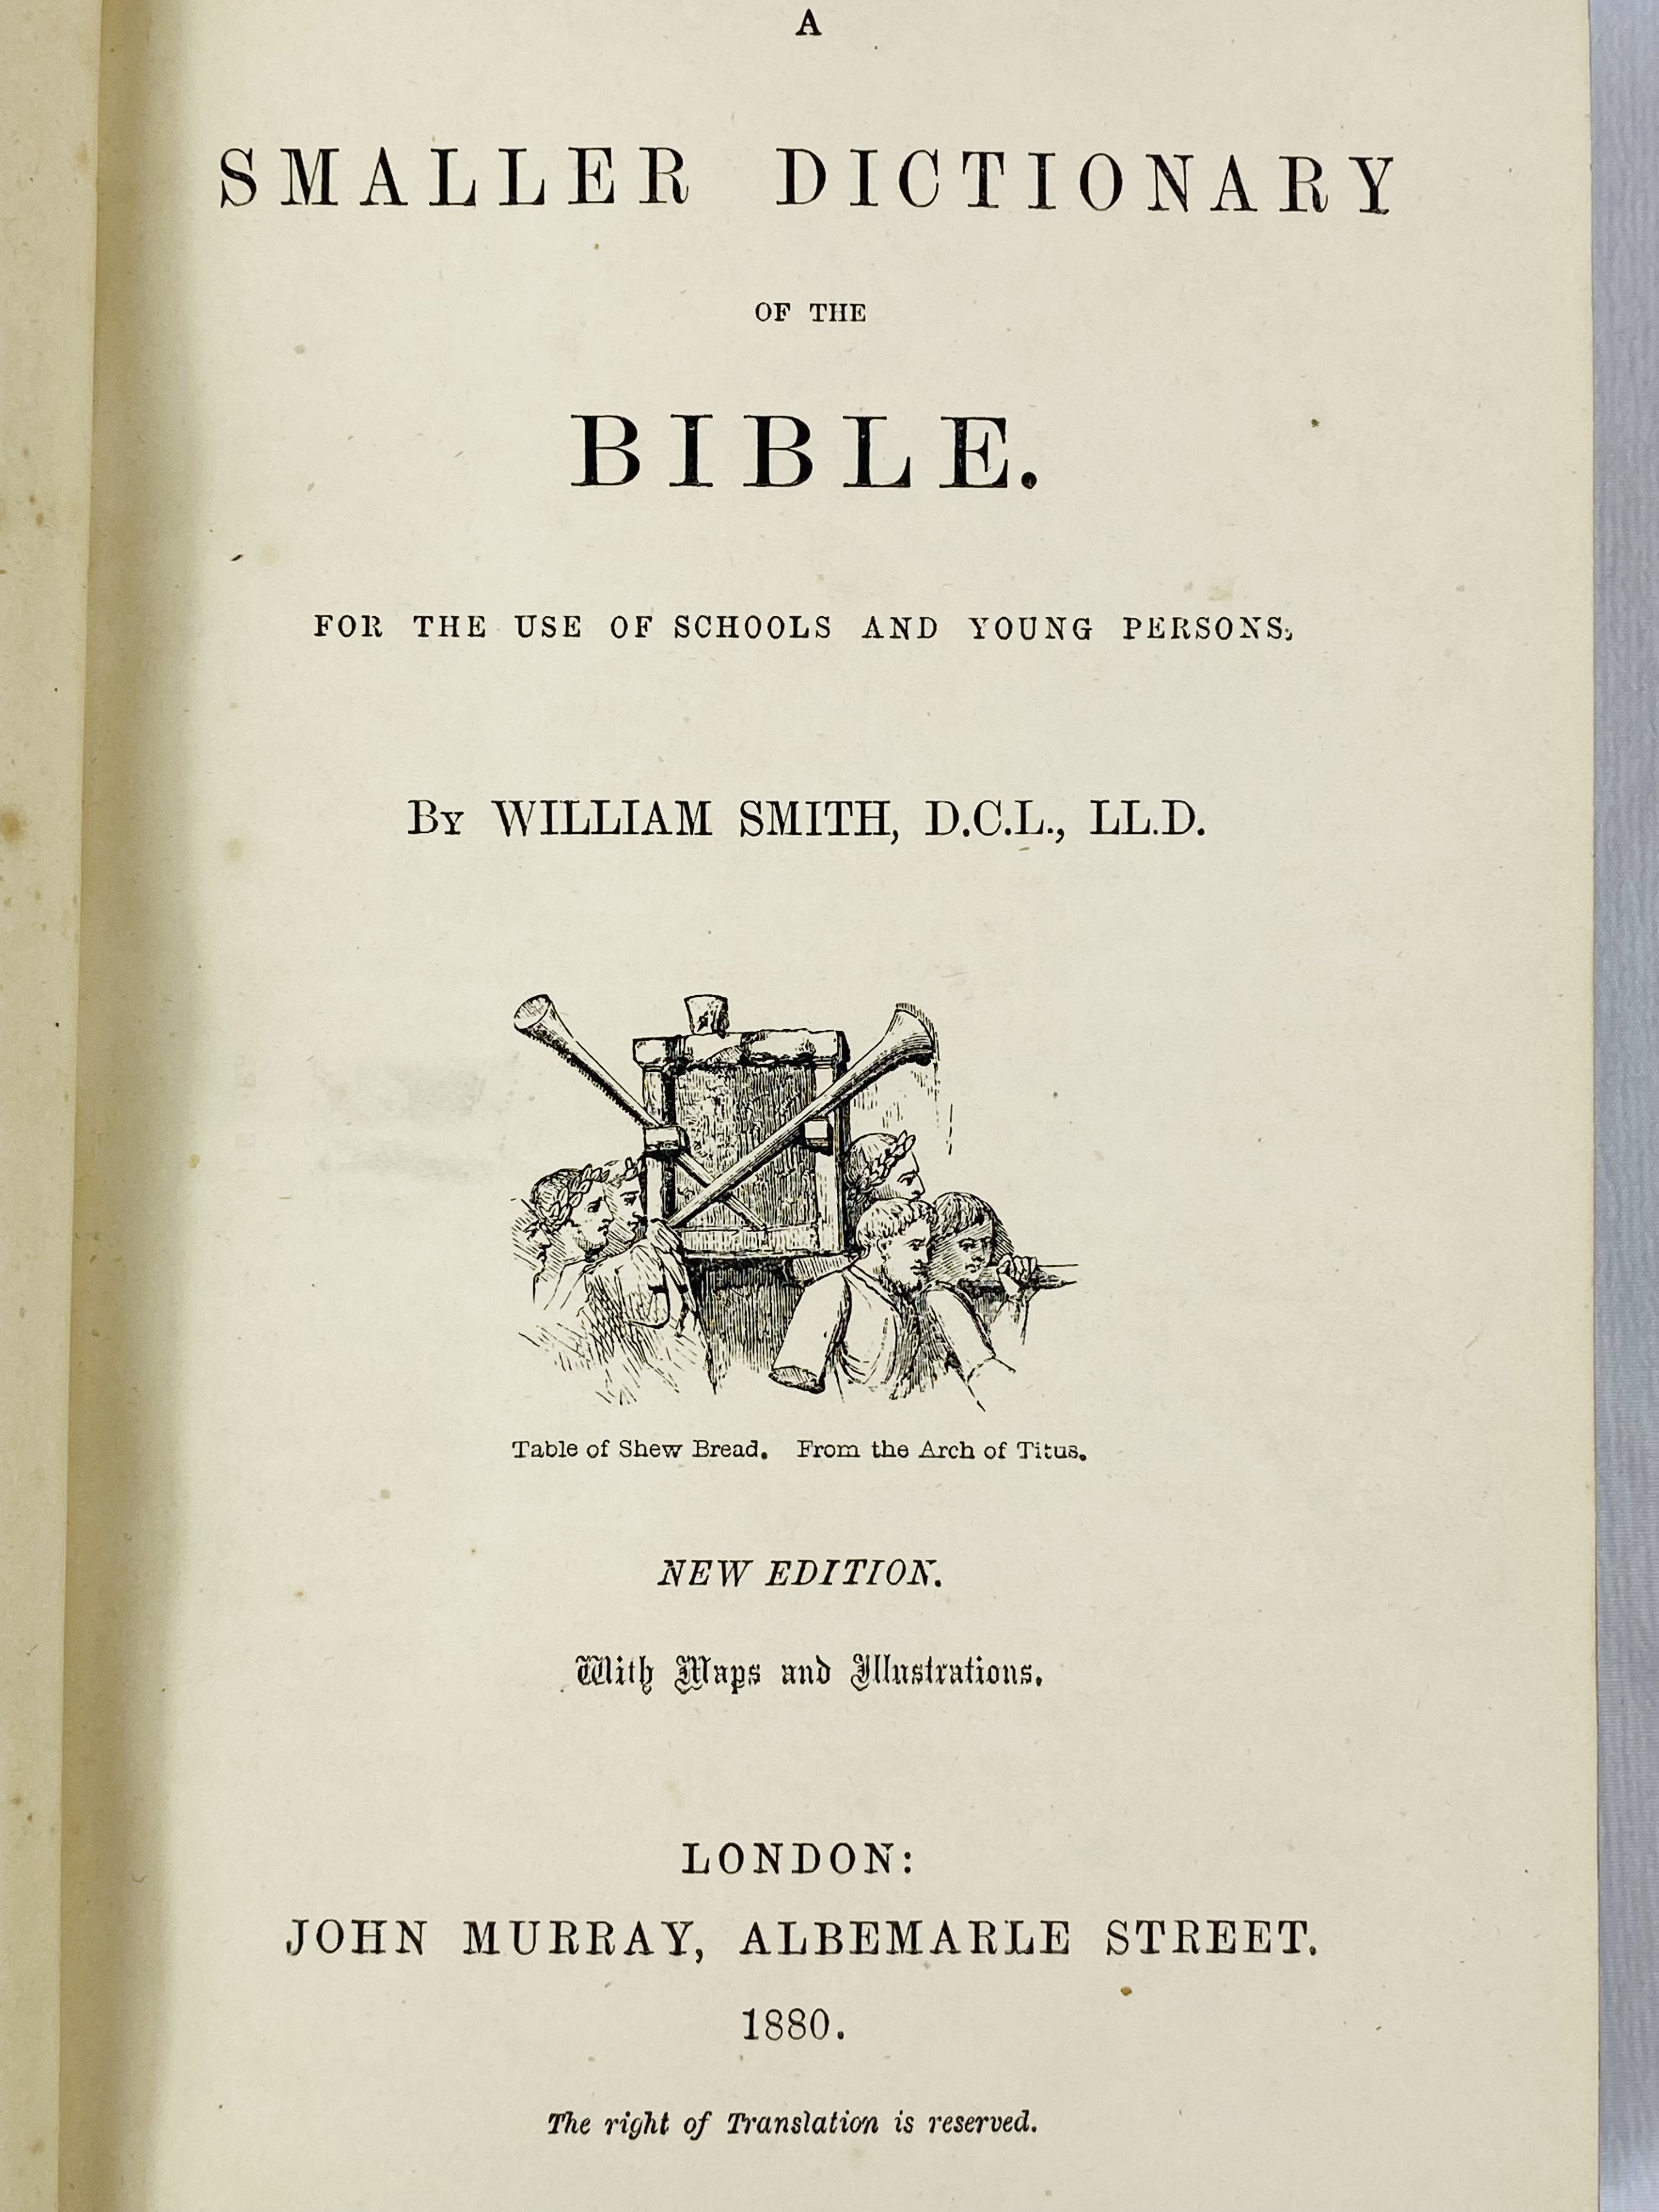 Chambers's Cyclopedia of English Literature, 1876; A Smaller Dictionary of the Bible,1880. - Image 2 of 4